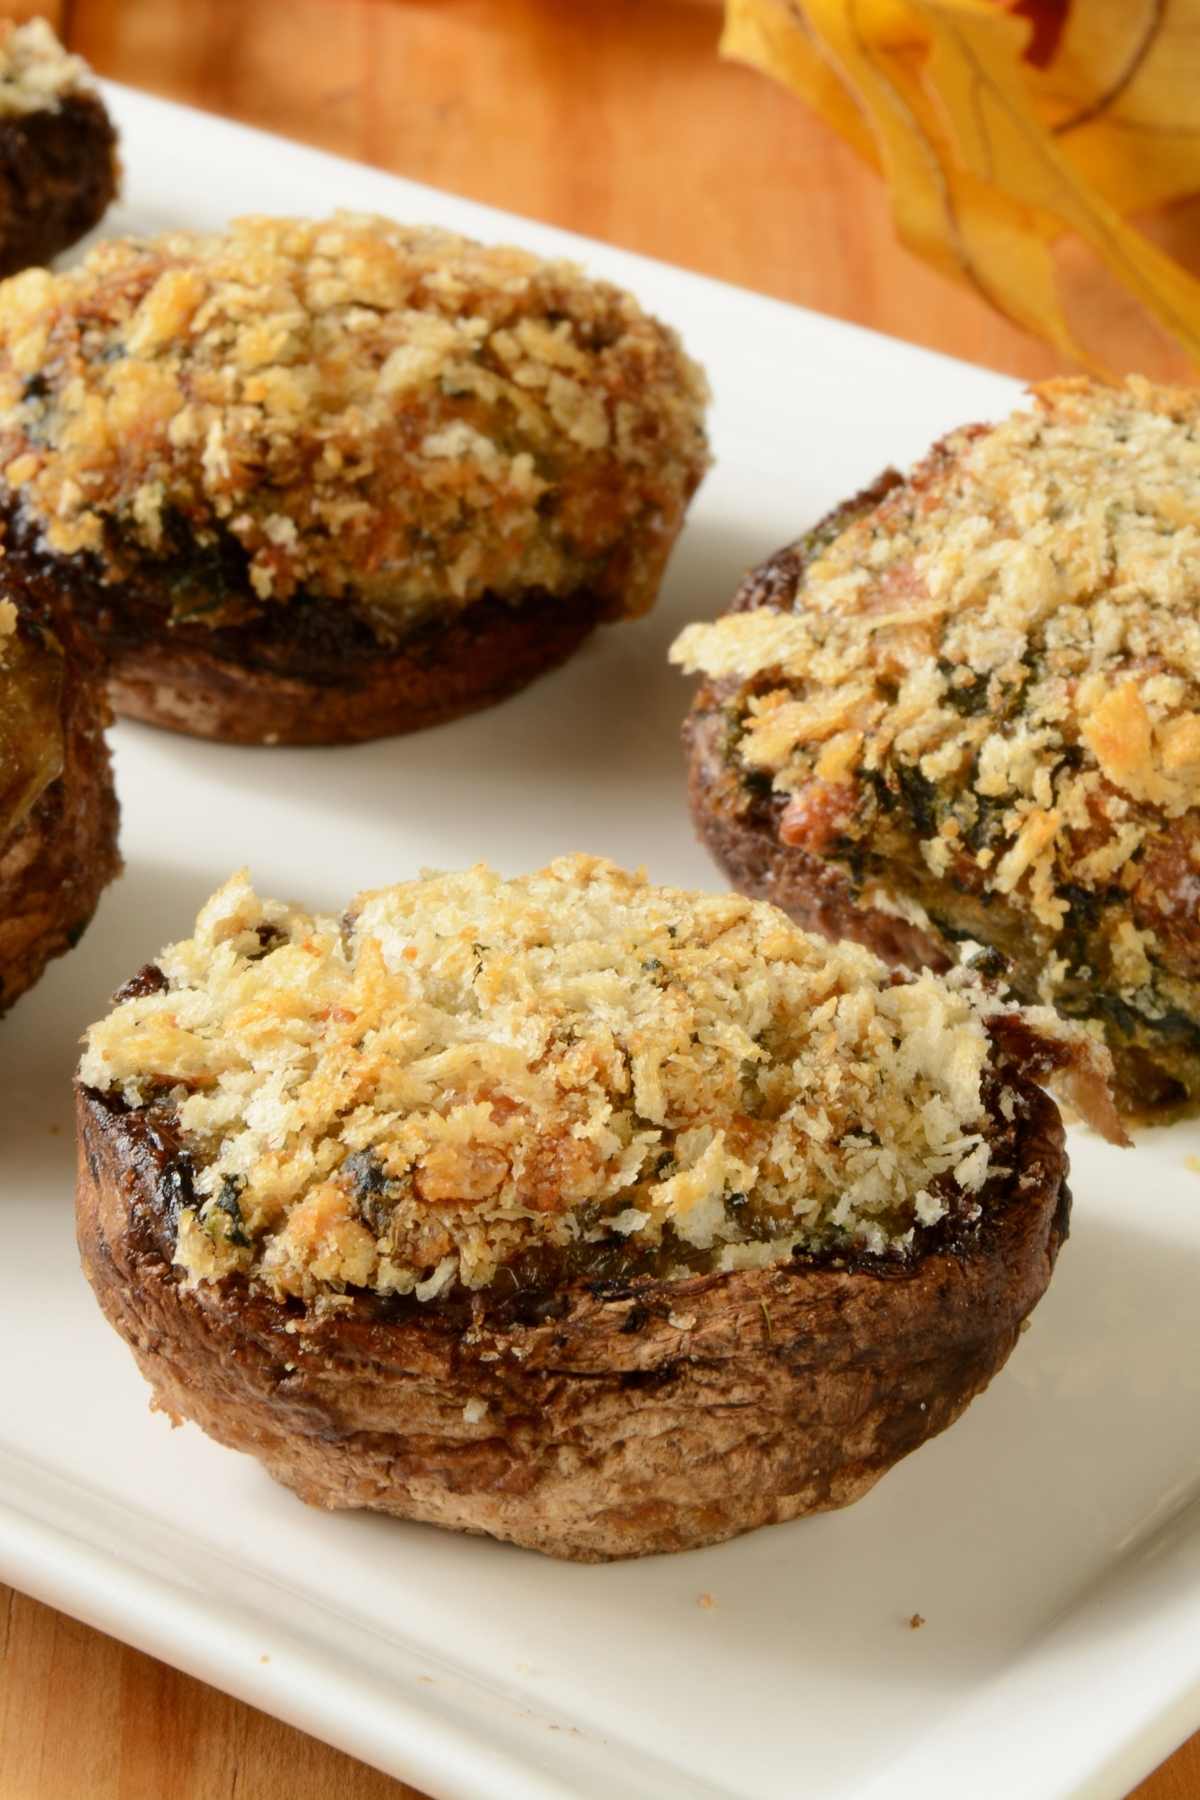 These fabulous Spinach-Stuffed Mushrooms are the perfect appetizer for a party. They’re made with two kinds of cheese and fresh baby spinach and are perfectly seasoned.